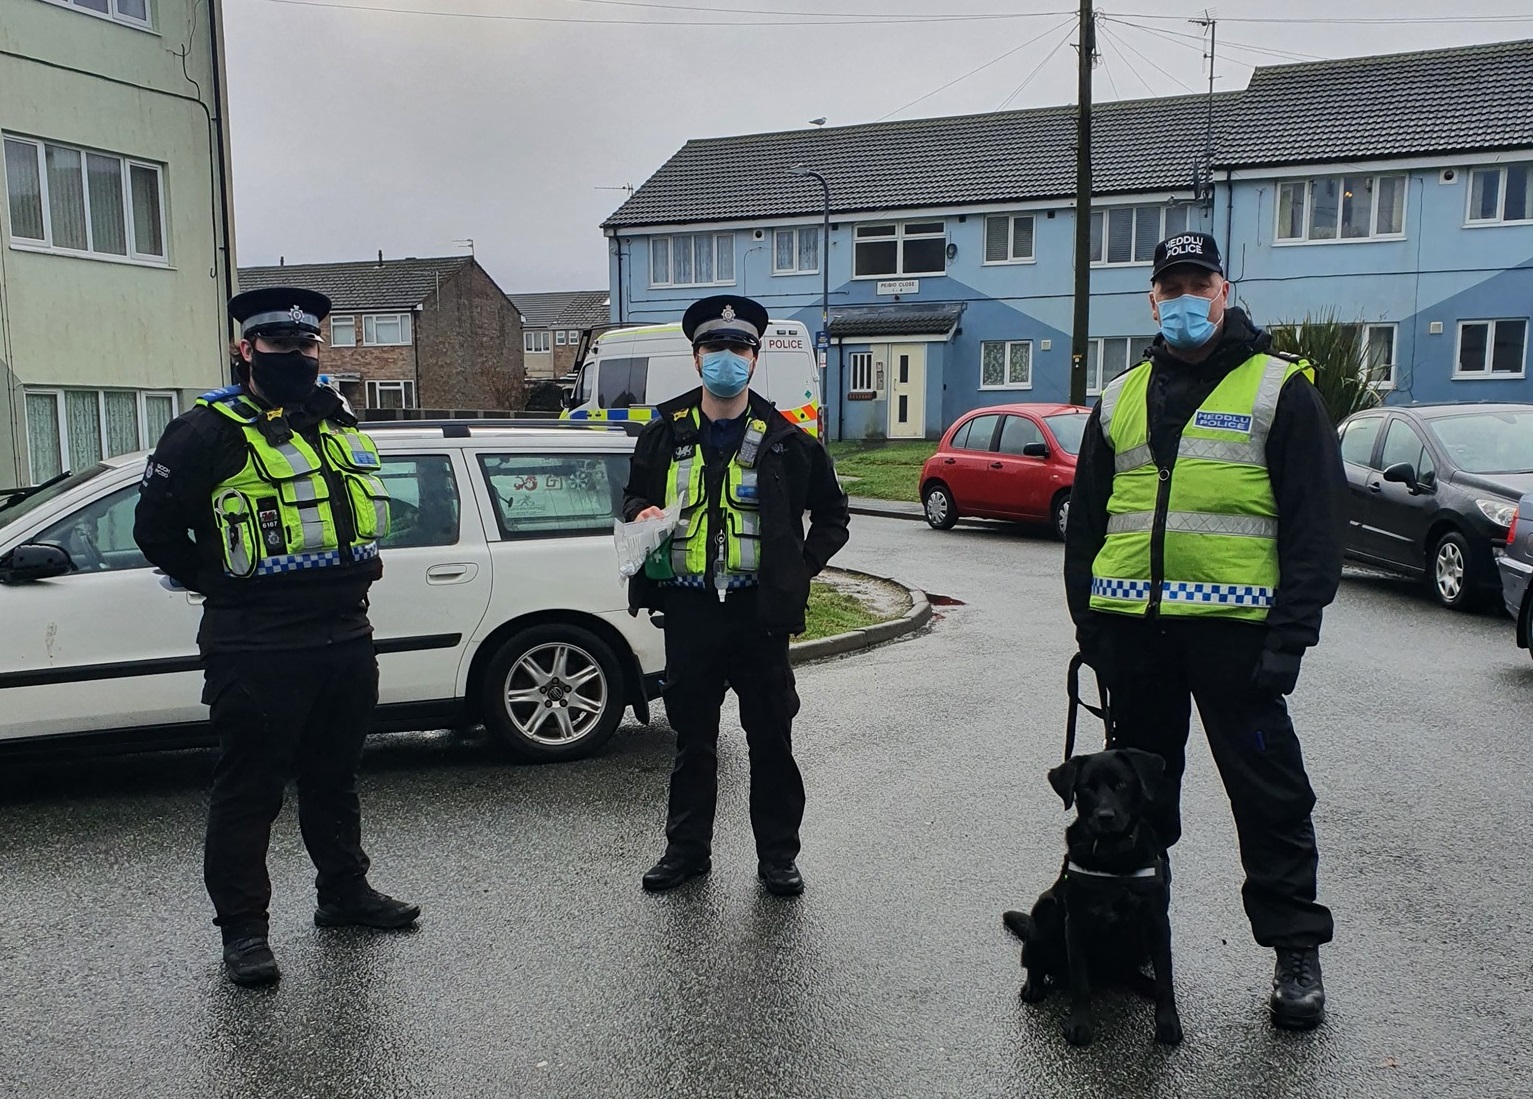 Three Arrested On Suspicion Of Drug Dealing Offences After Police Carry Out Raids In Holyhead 7737